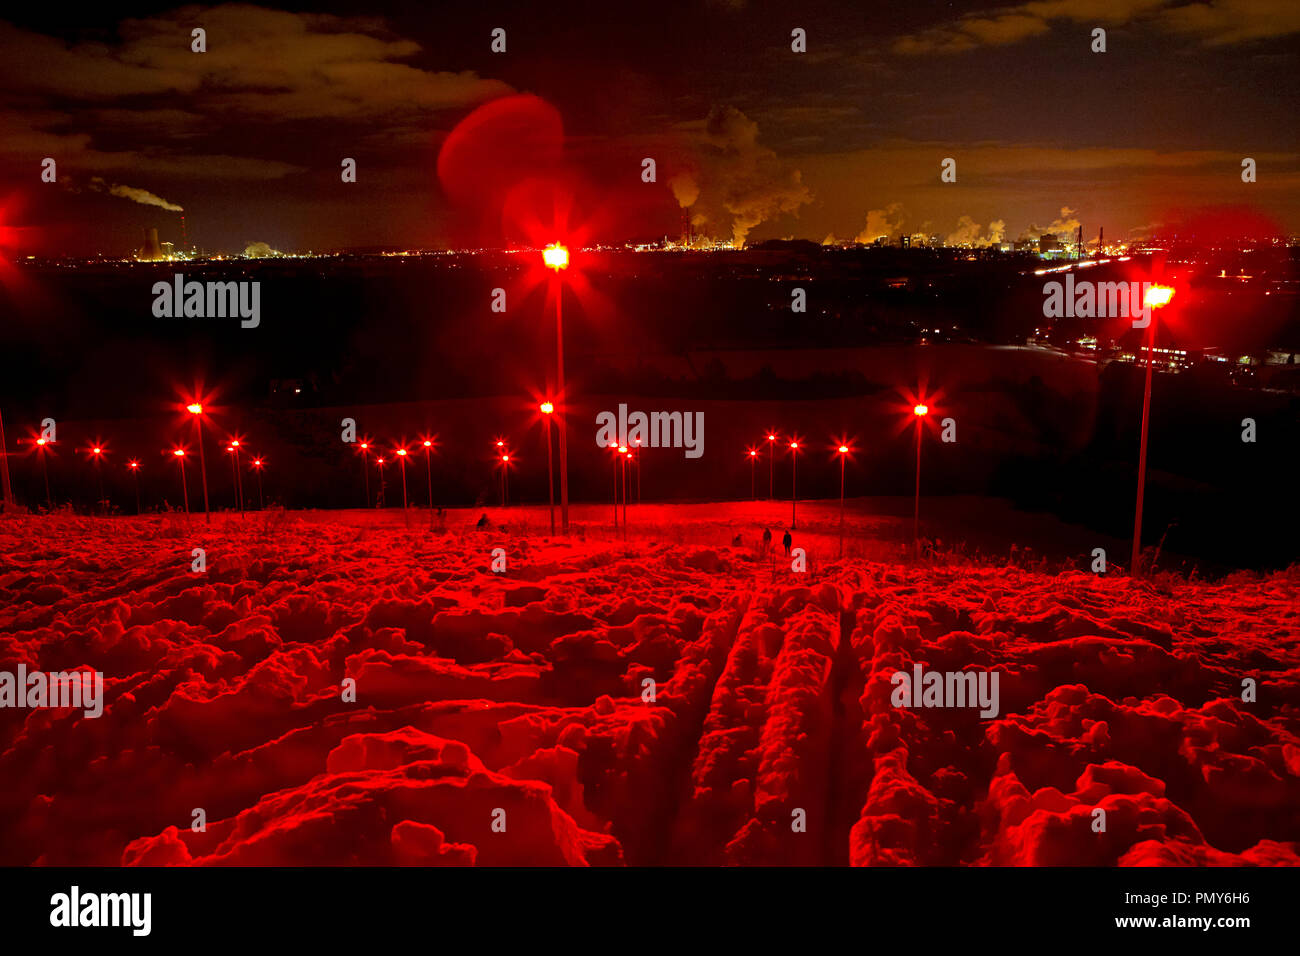 In September 2007, the oversized miner's lamp 'Geleucht' was erected as a landmark by the art professor Otto Piene on the Halde Rheinpreußen in Moers. The snow-covered slope of the heap is shrouded in red light by numerous headlamps. Stock Photo